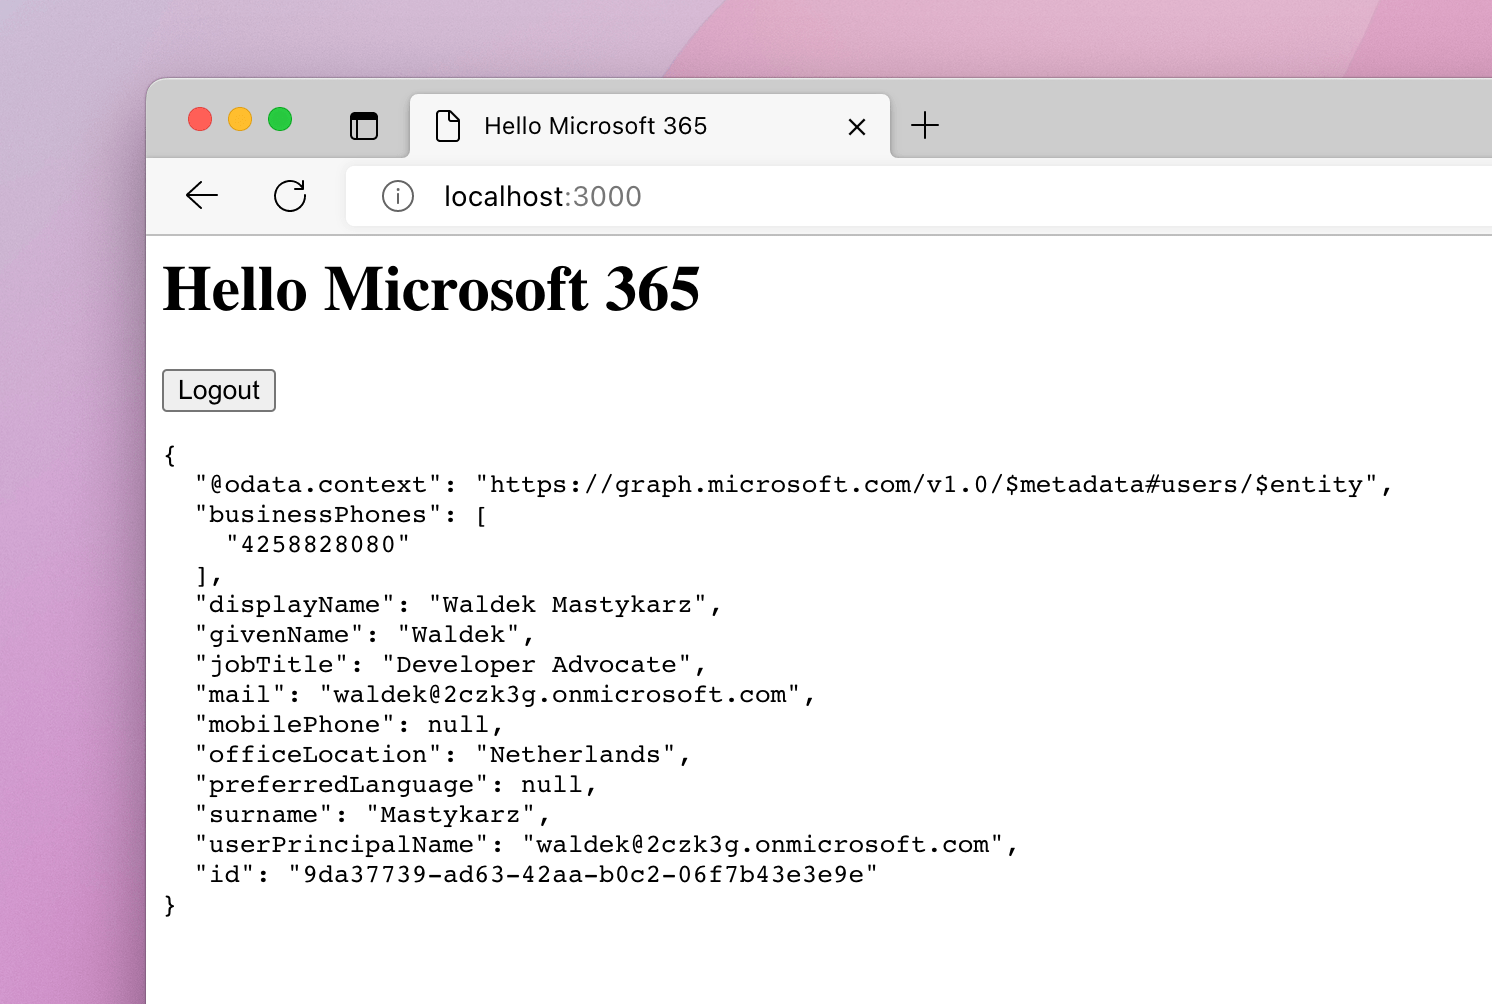 Browser window with a web page showing Microsoft 365 user profile information